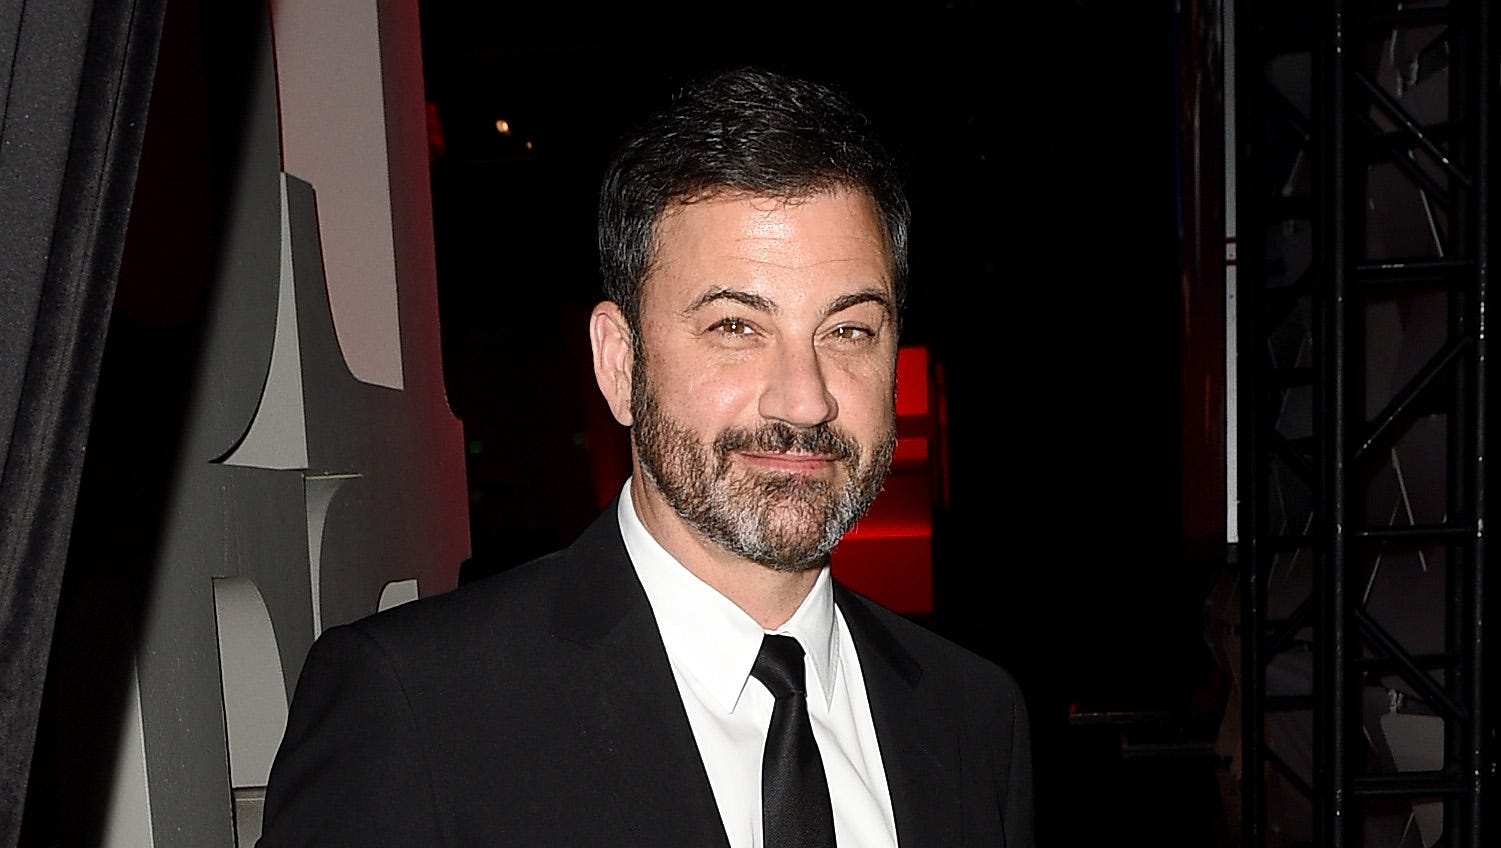 Jimmy Kimmel's baby son has second surgery; Kimmel will take week off